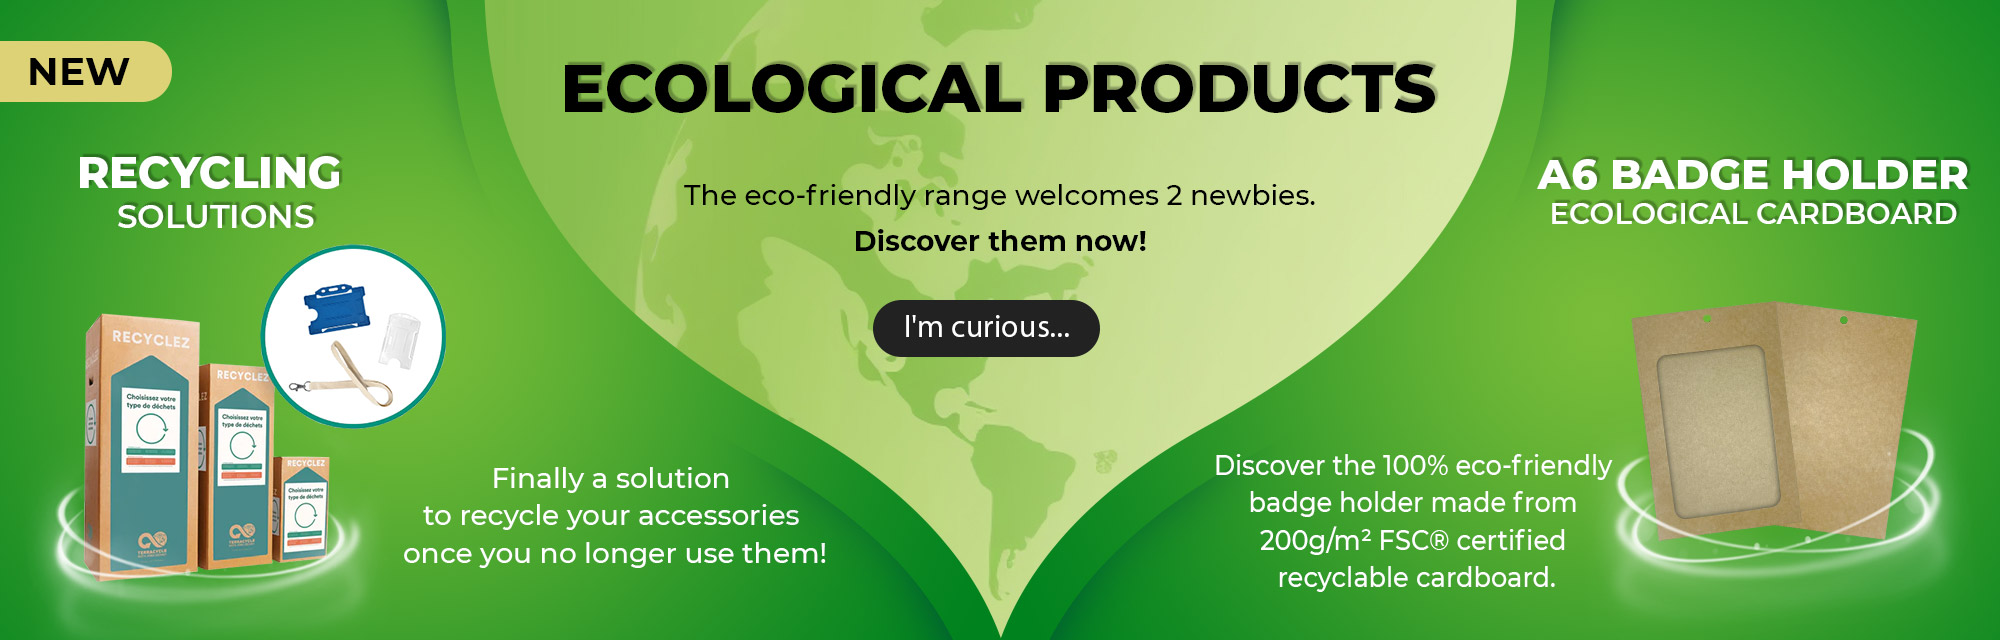 Ecological products